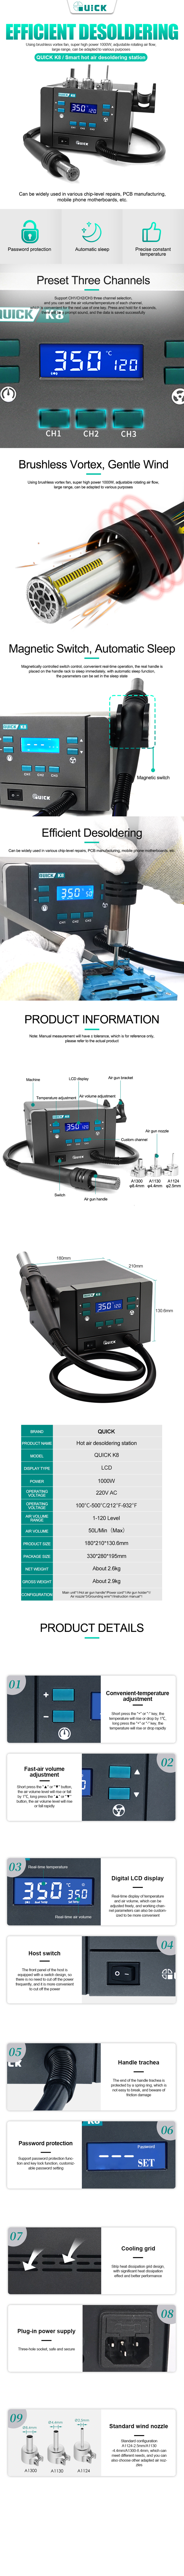 Quick K8 Lead-free hot air soldering station/110V/220V Quick K8 Lead-free hot air soldering station